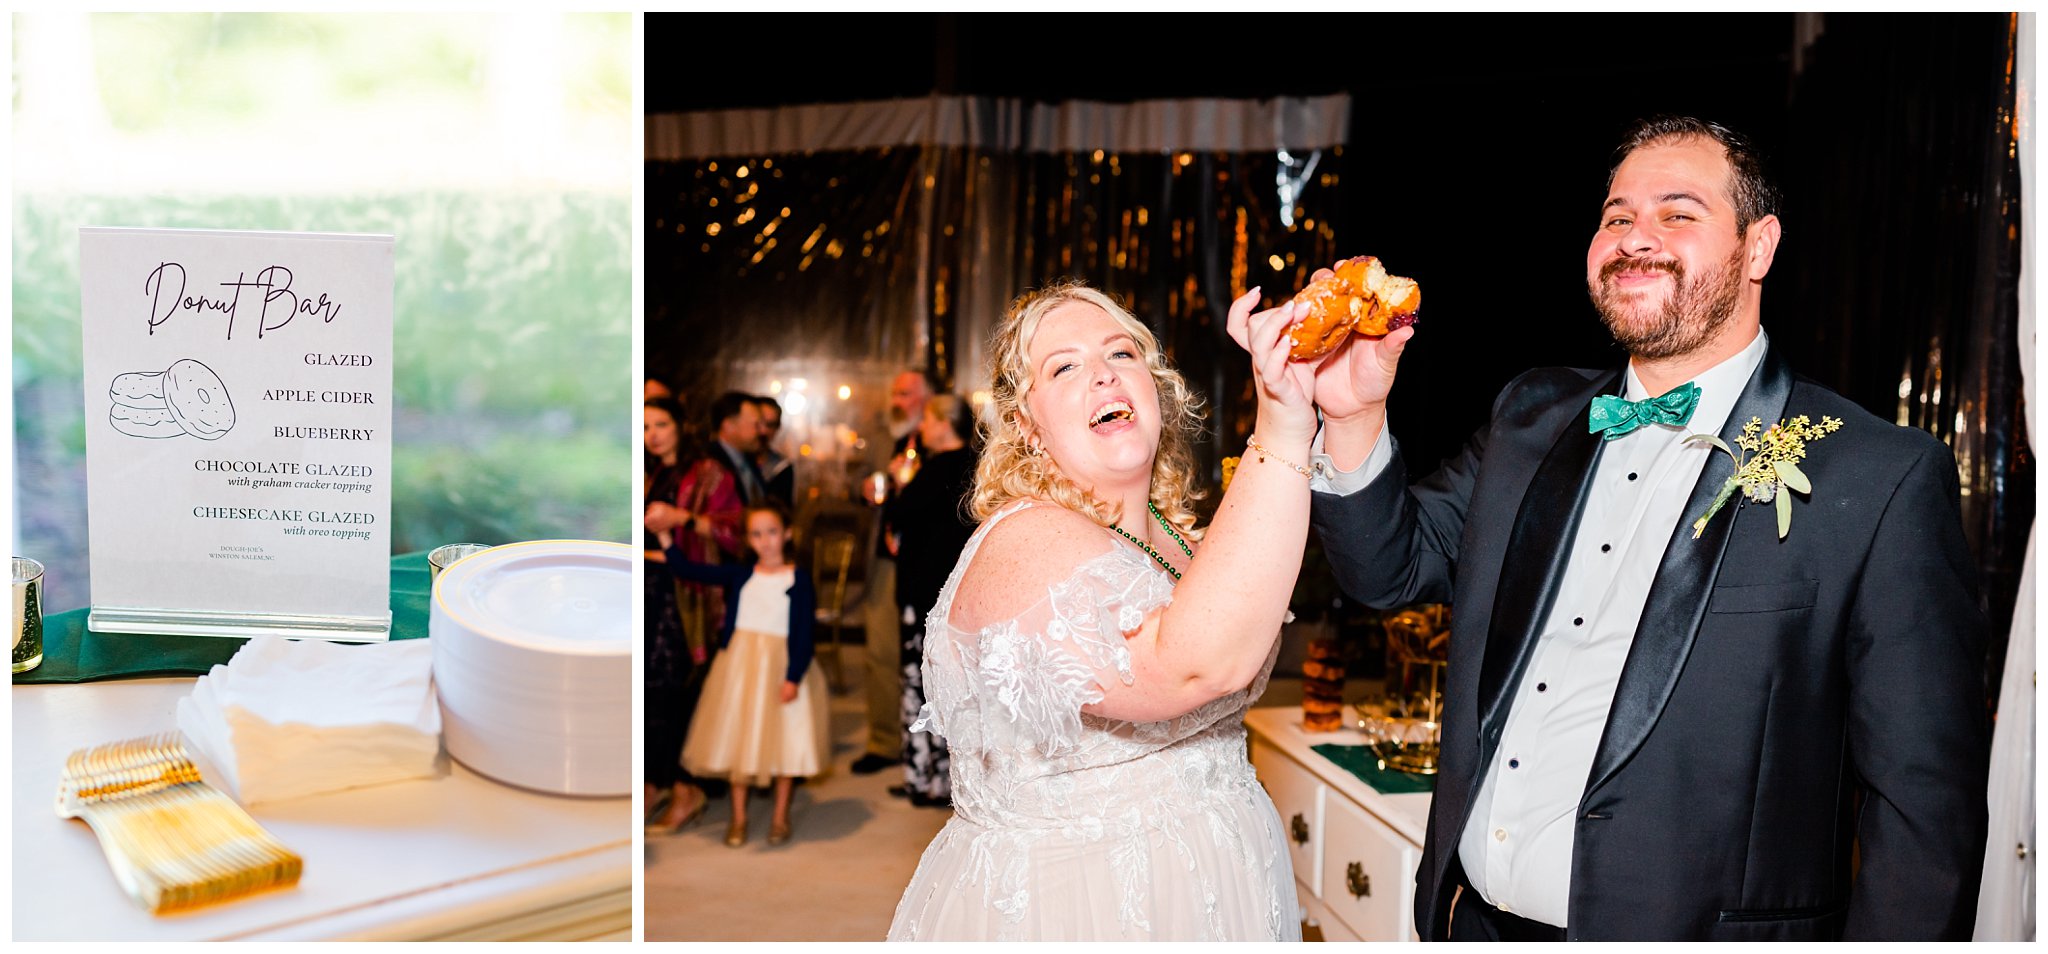 Charlotte wedding photographer captures couple eating a donut at reception